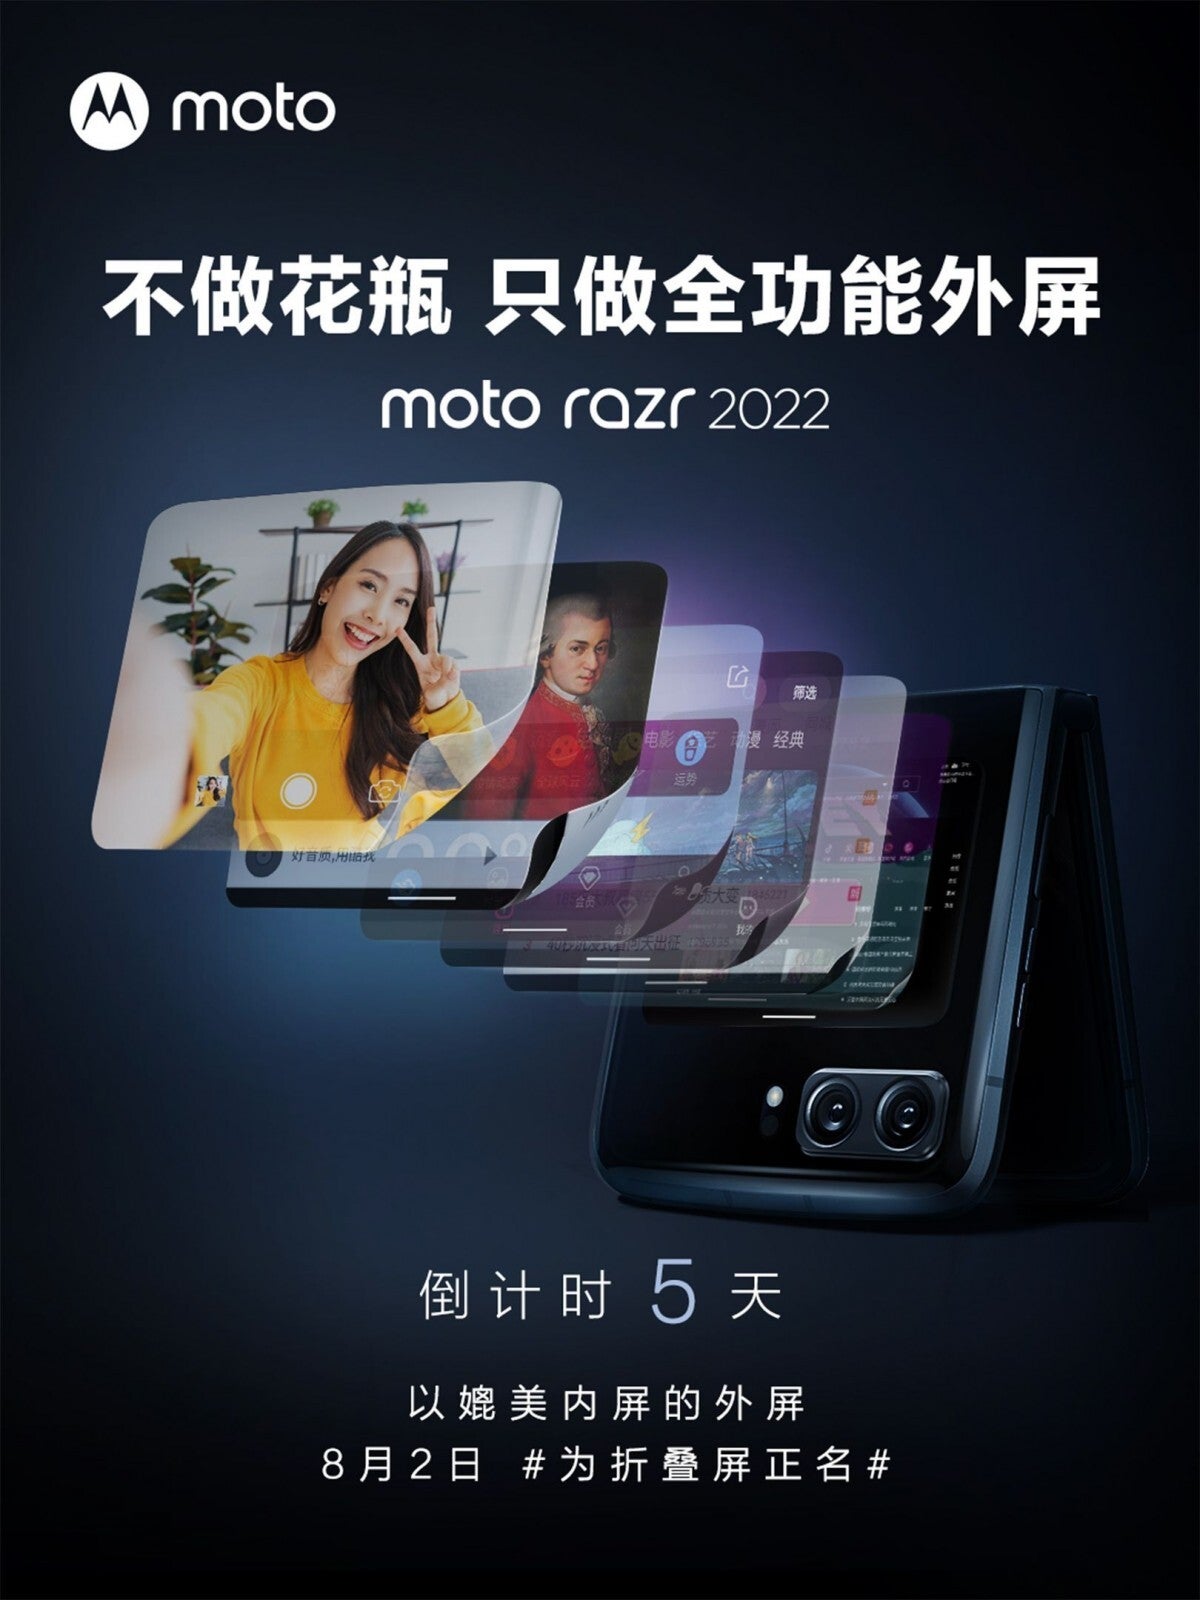 New teaser photo shows the bigger outer screen of the Moto Razr 2022